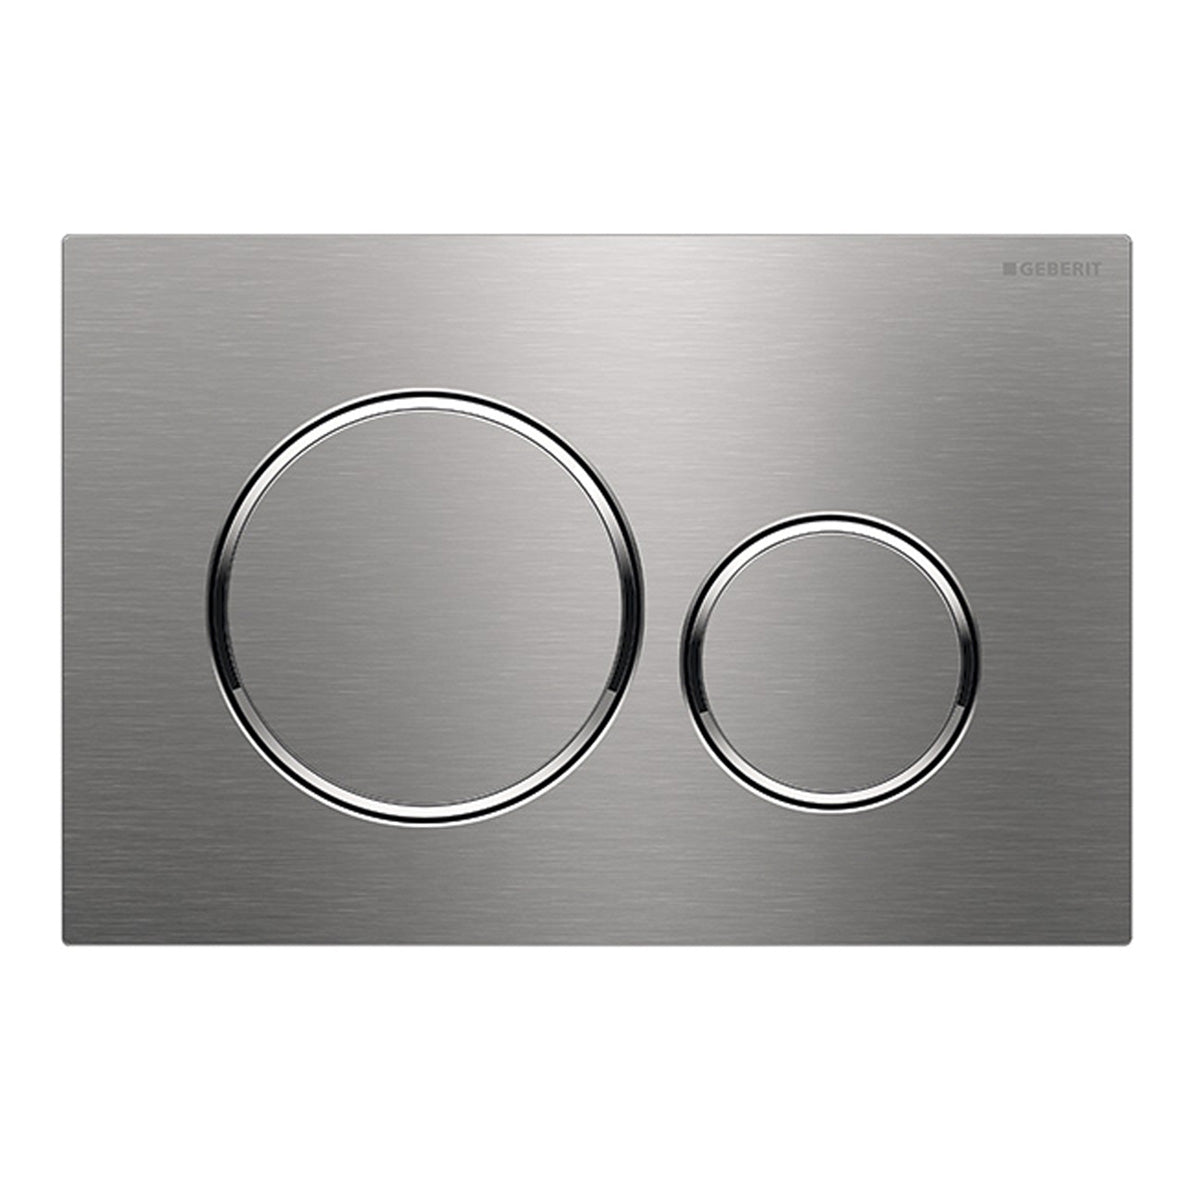 Geberit Sigma20 Dual Flush Button & Access Plate, Stainless Steel with Chrome Trim Design